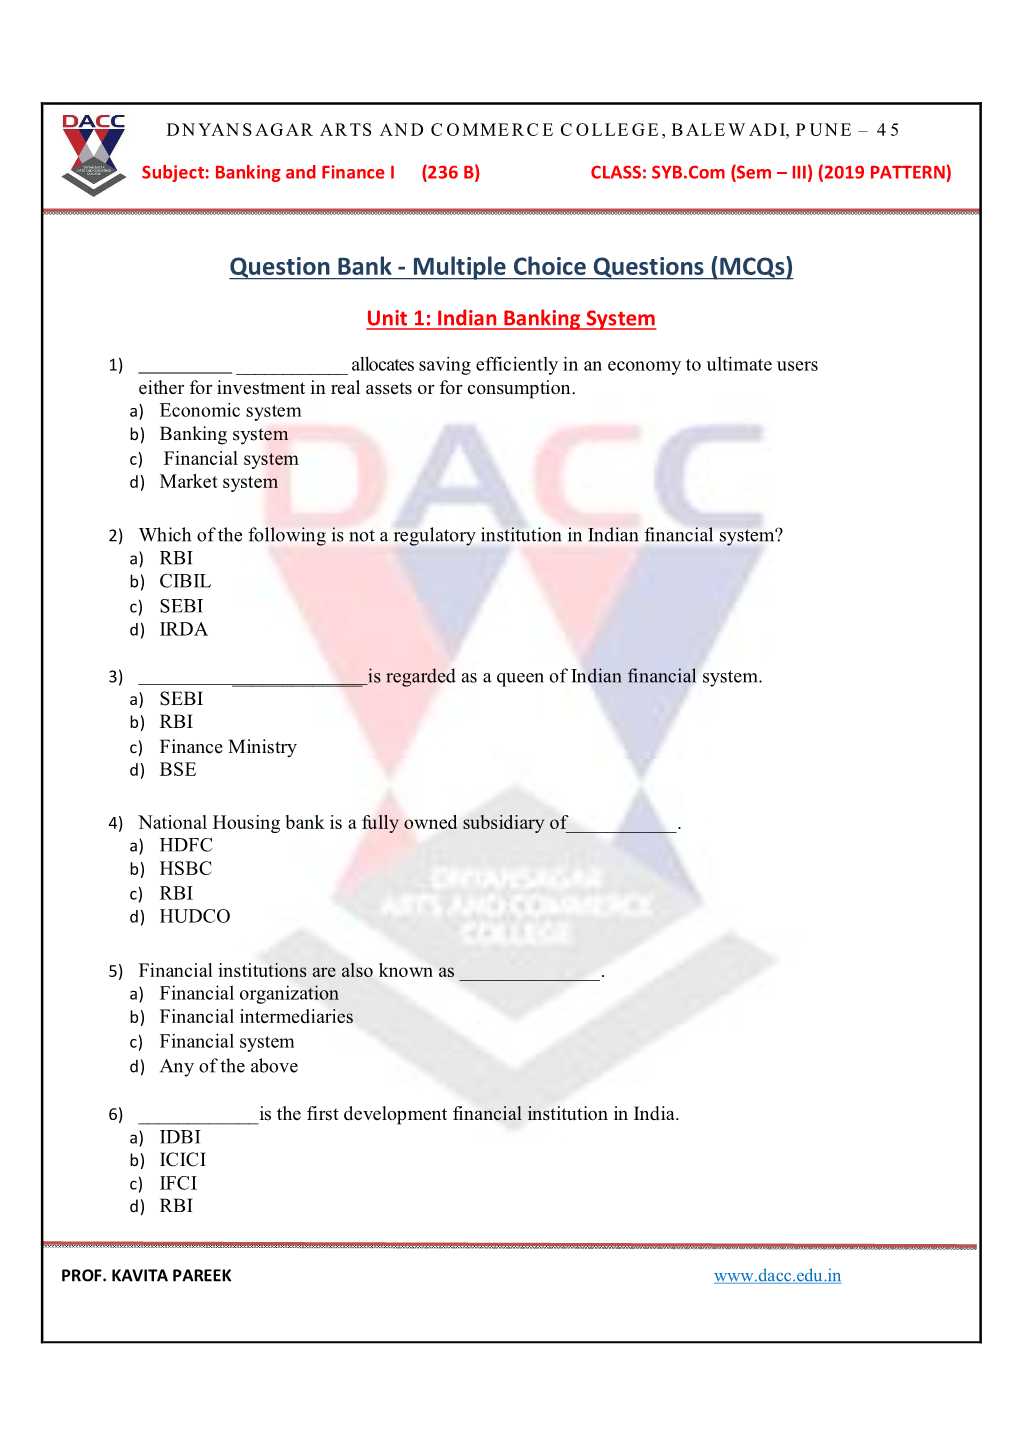 Question Bank - Multiple Choice Questions (Mcqs)